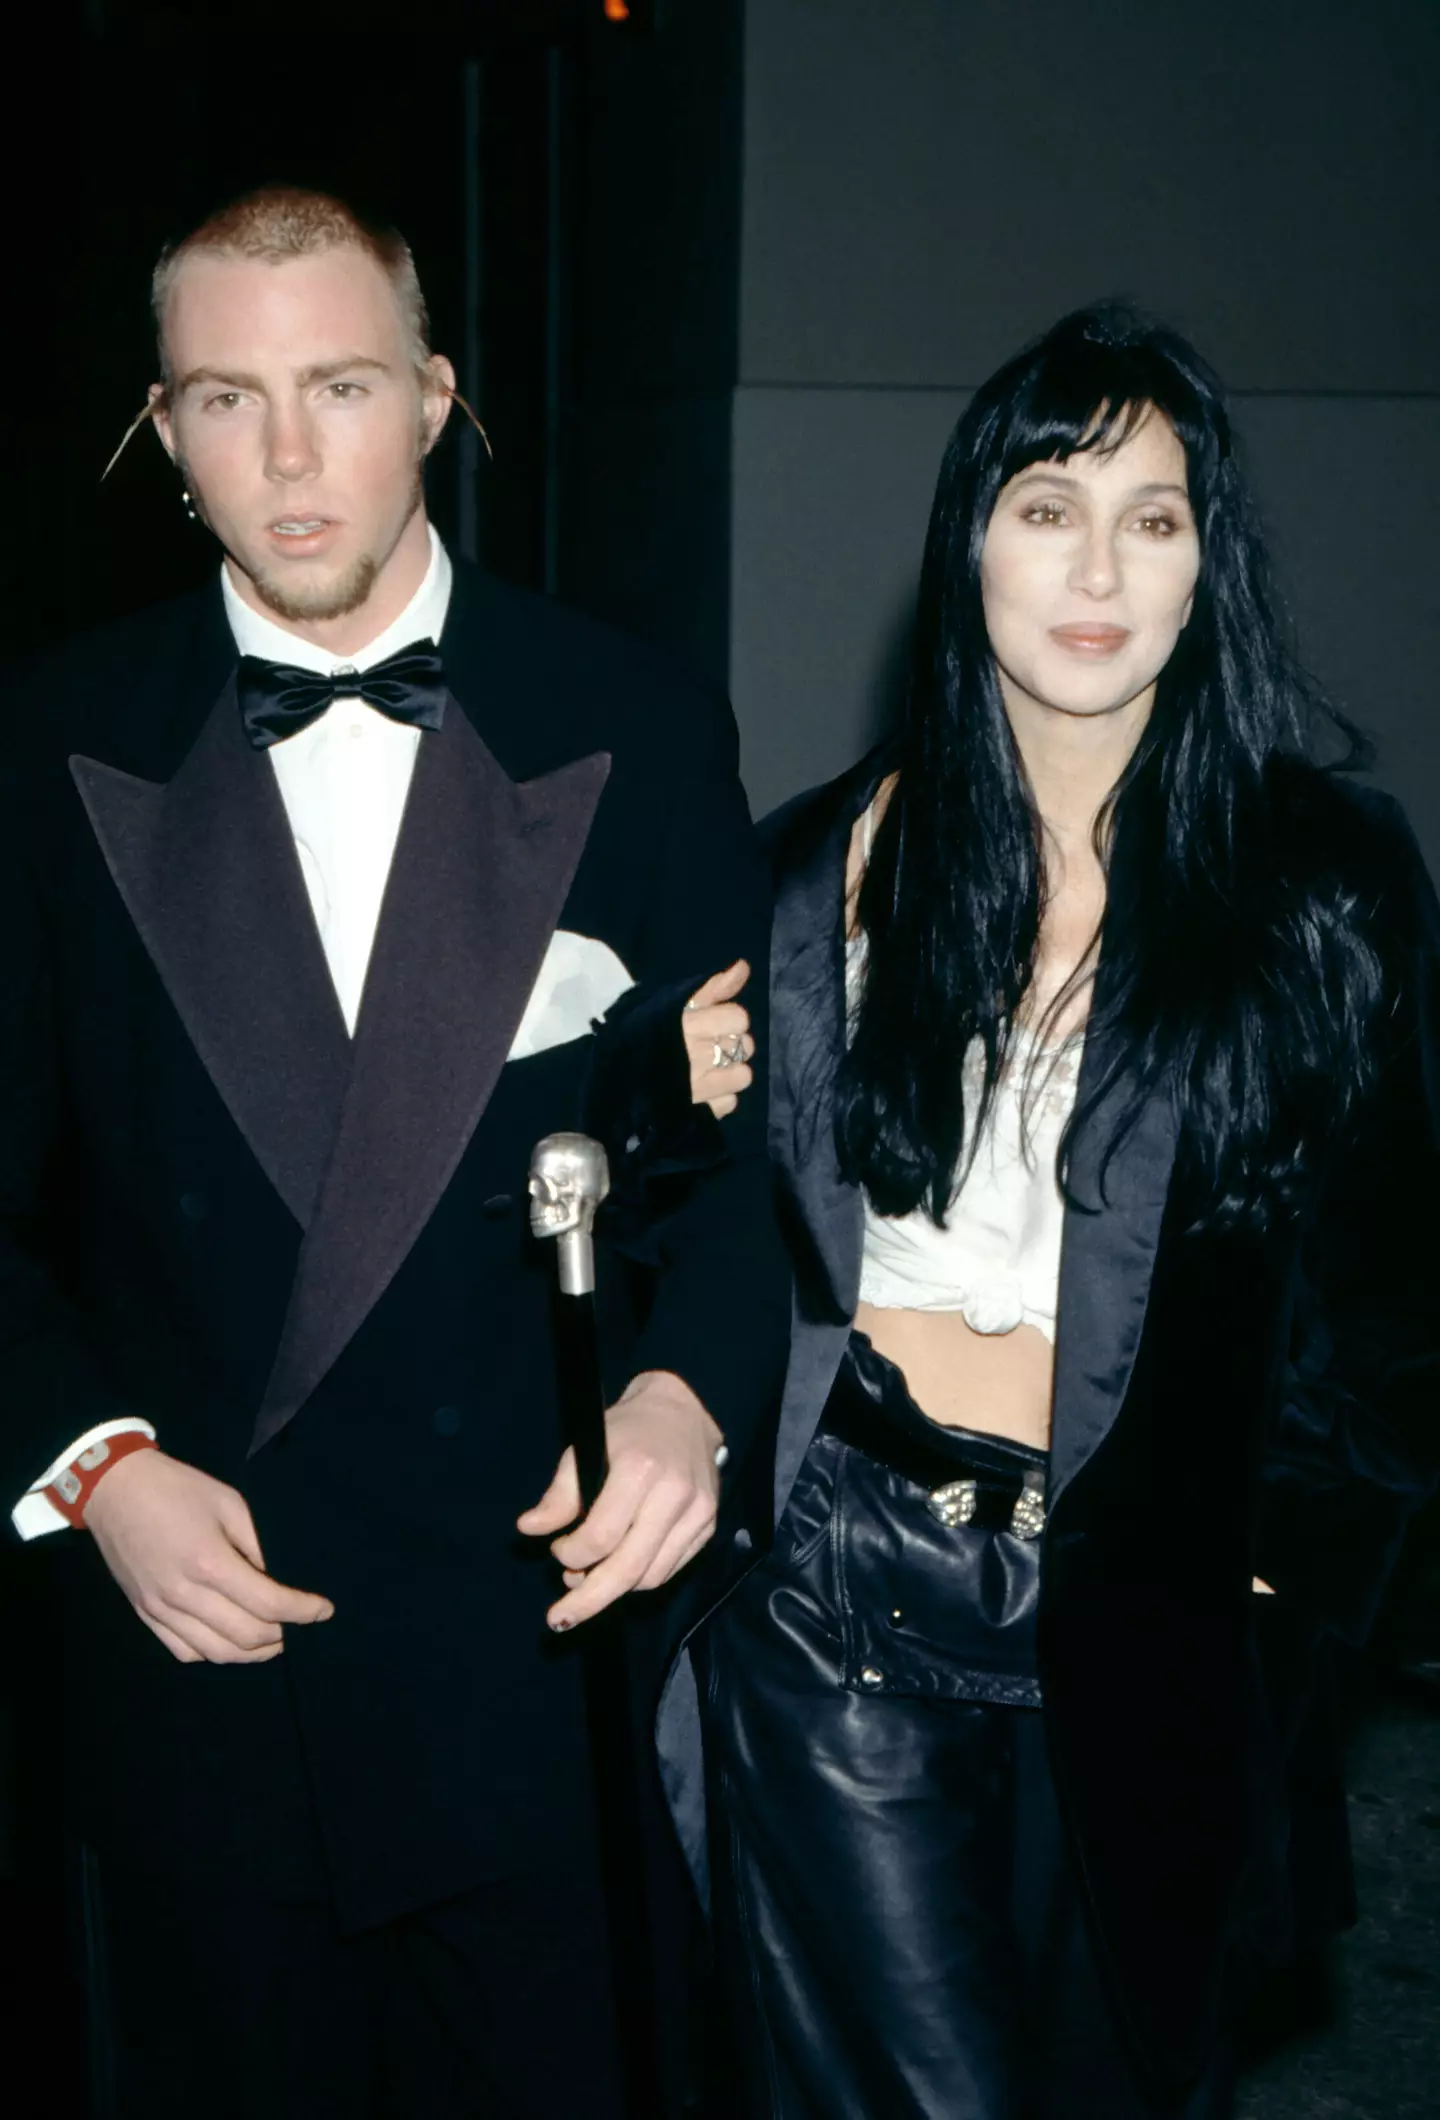 Cher and Allman reportedly have a rocky relationship.